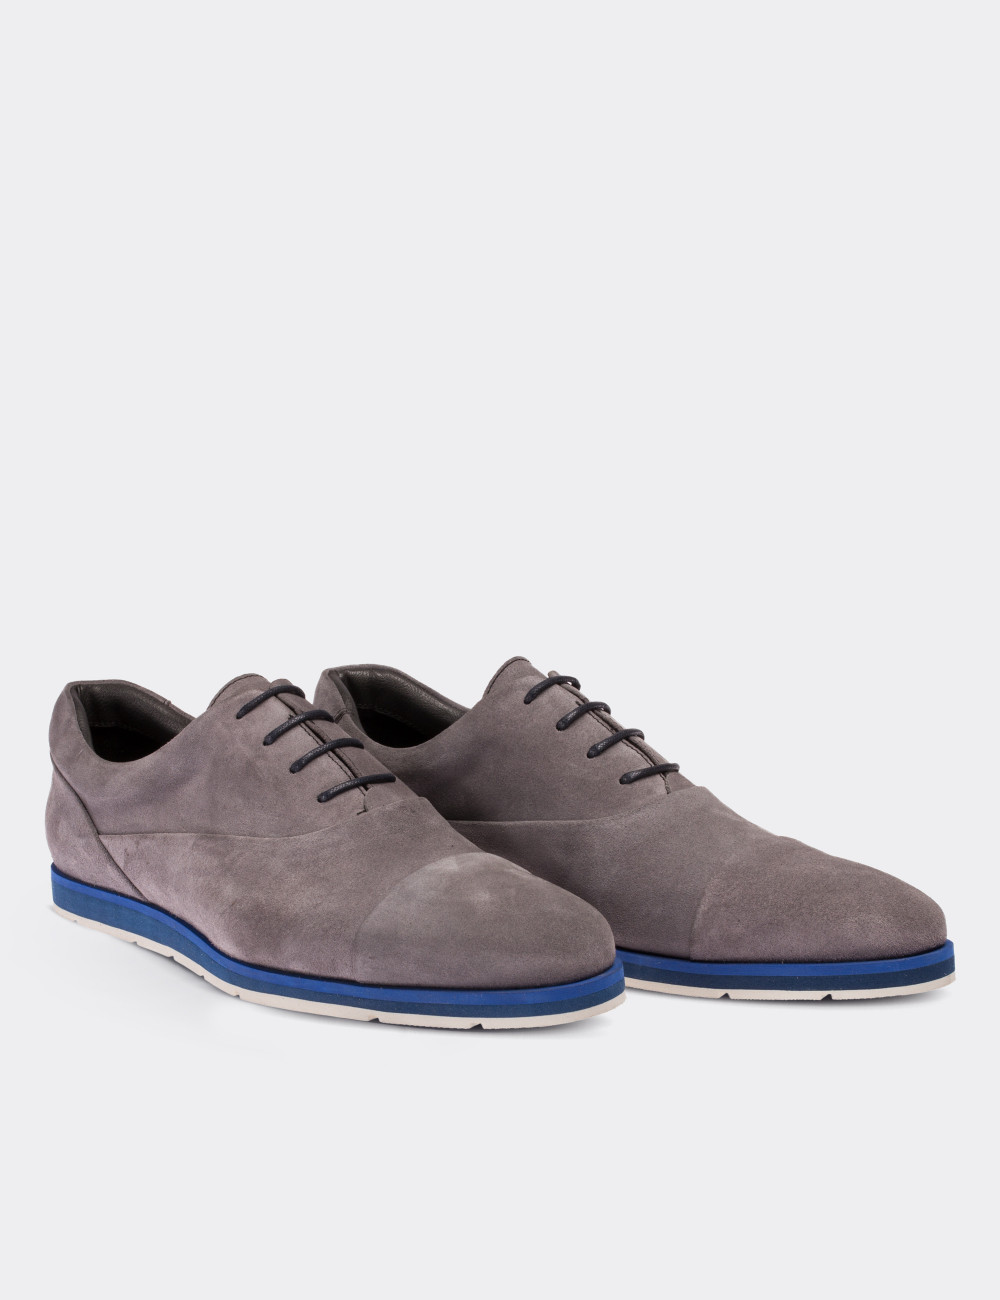 Gray Suede Leather Lace-up Shoes - 01519MGRIE01